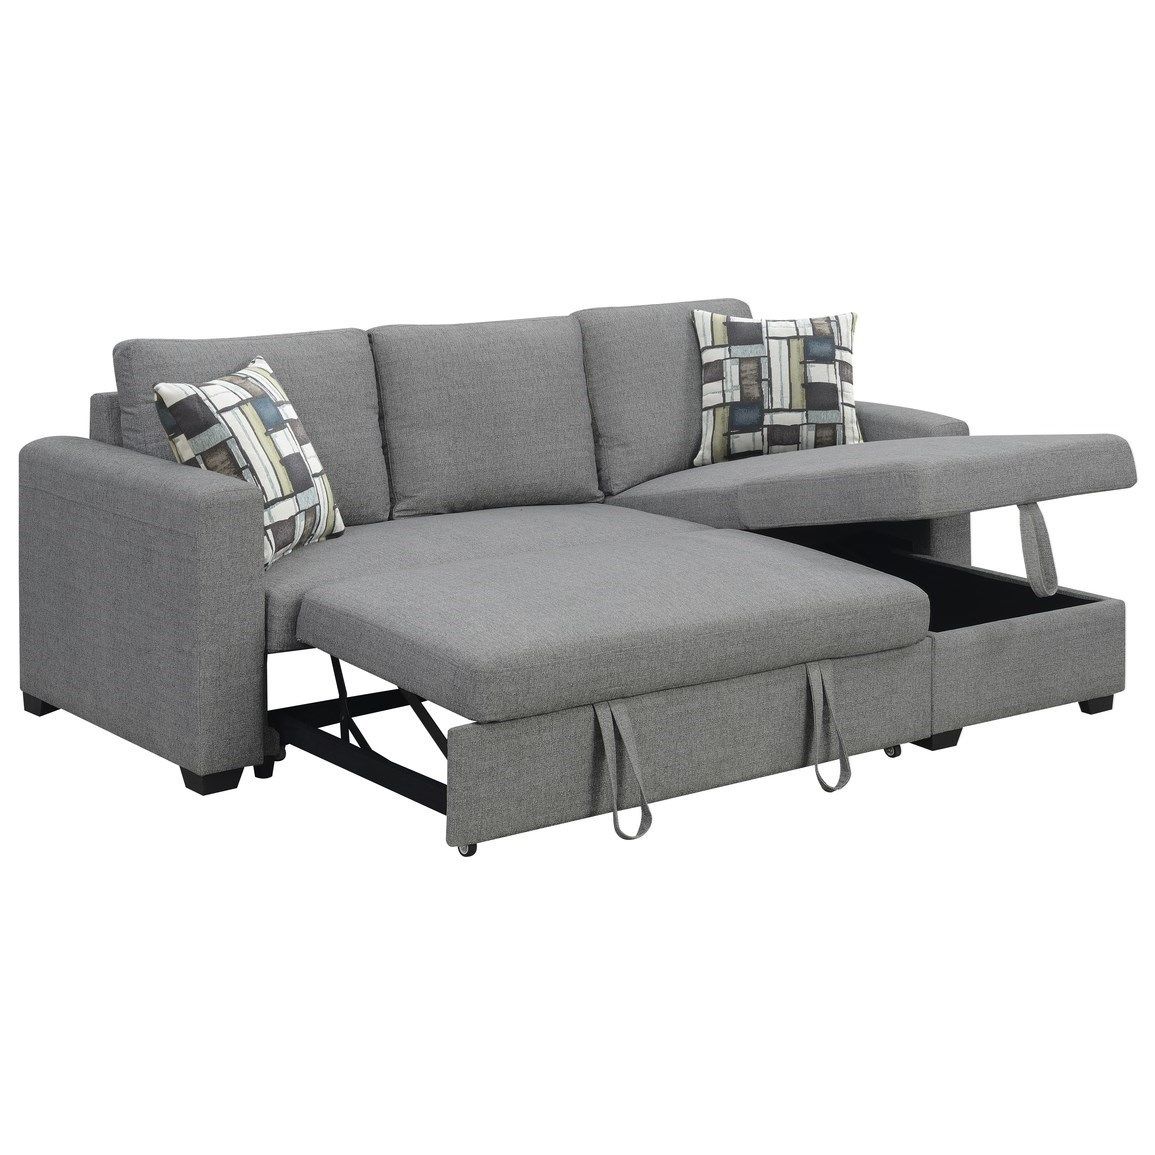 Langley 2 Piece Sectional With Reversible Chaise | Sadler Intended For Palisades Reversible Small Space Sectional Sofas With Storage (View 9 of 15)